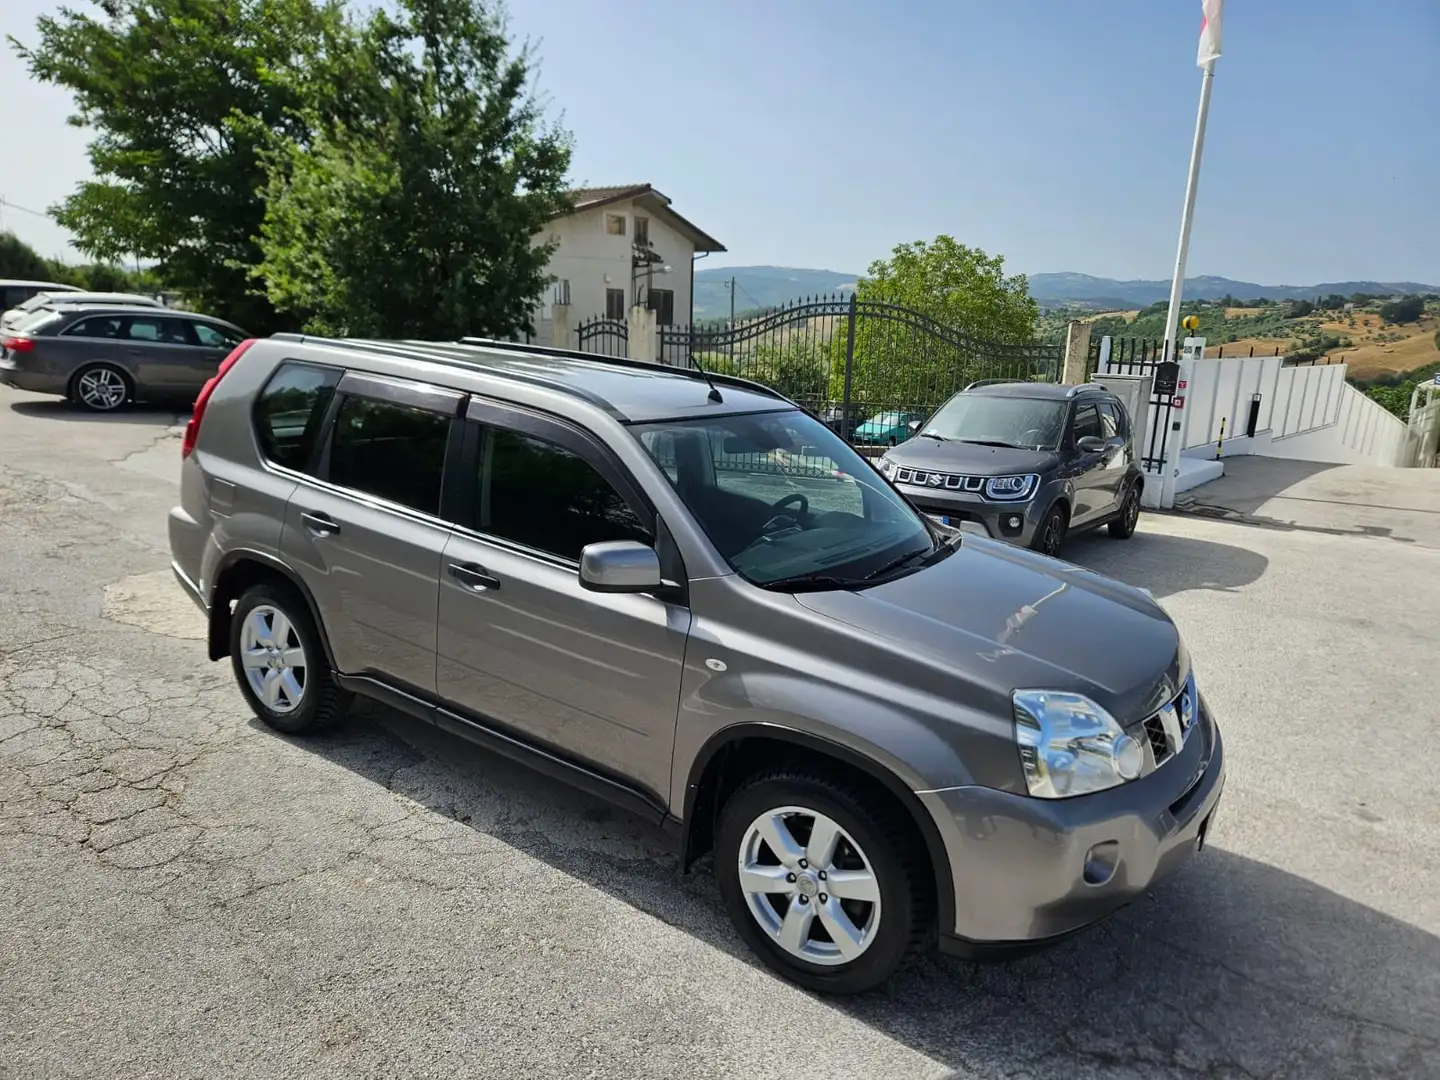 Nissan X-Trail 2.0 DCI 4X4 - Promo Motore nuovo Beżowy - 2